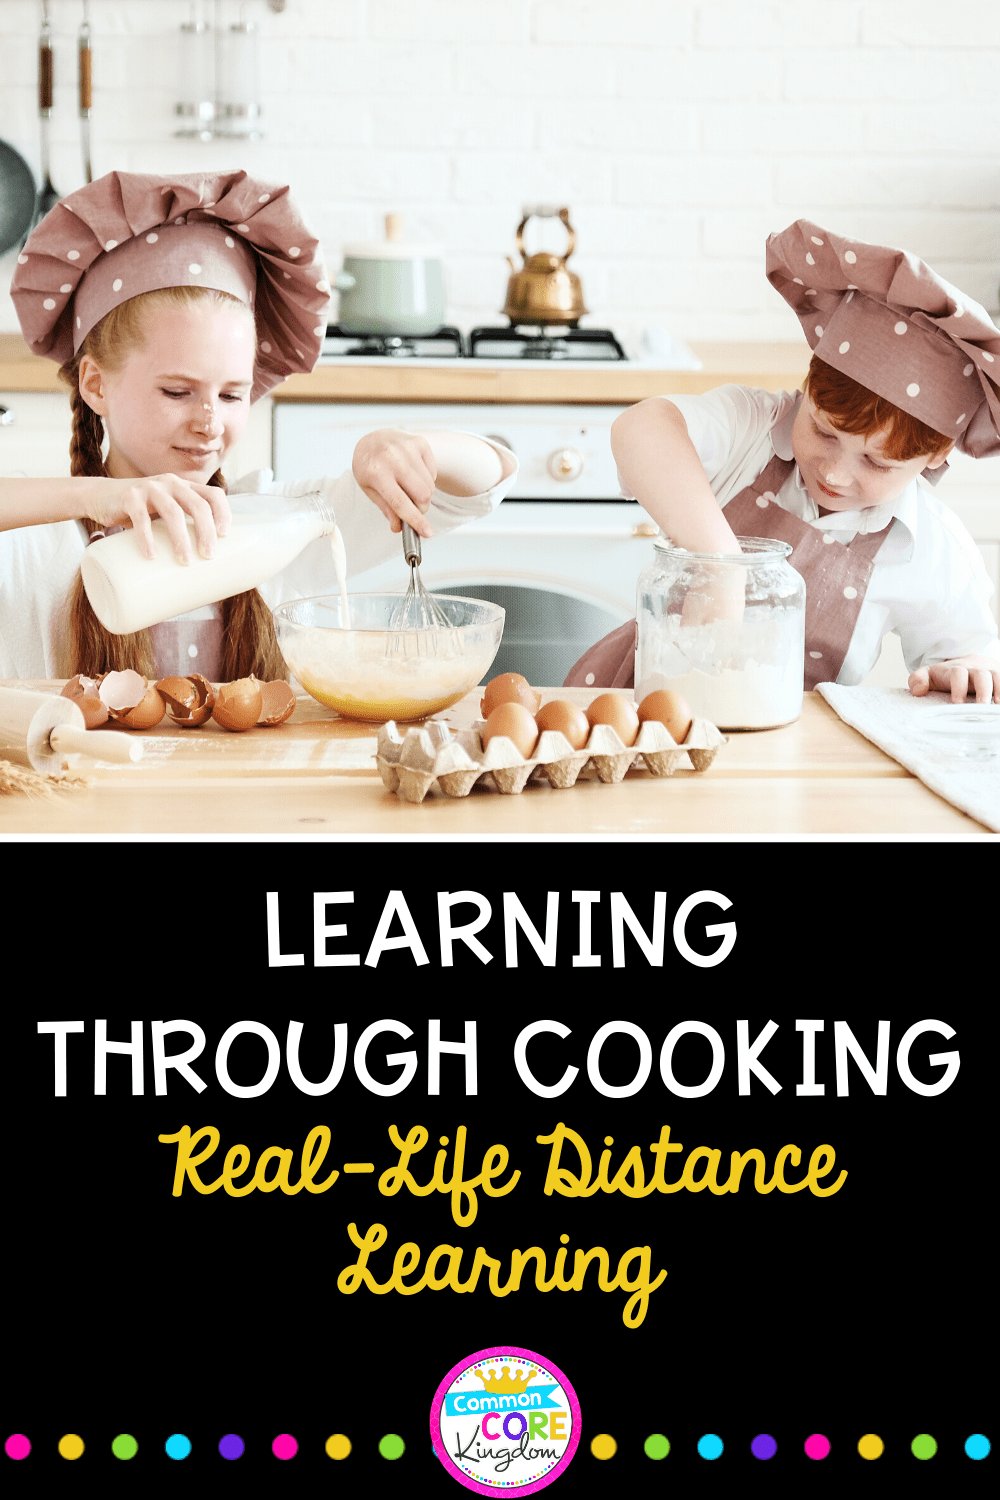 Two students wearing cooking hats and aprons are breaking eggs and mixing a batter with text that says learning through cooking real life distance learning